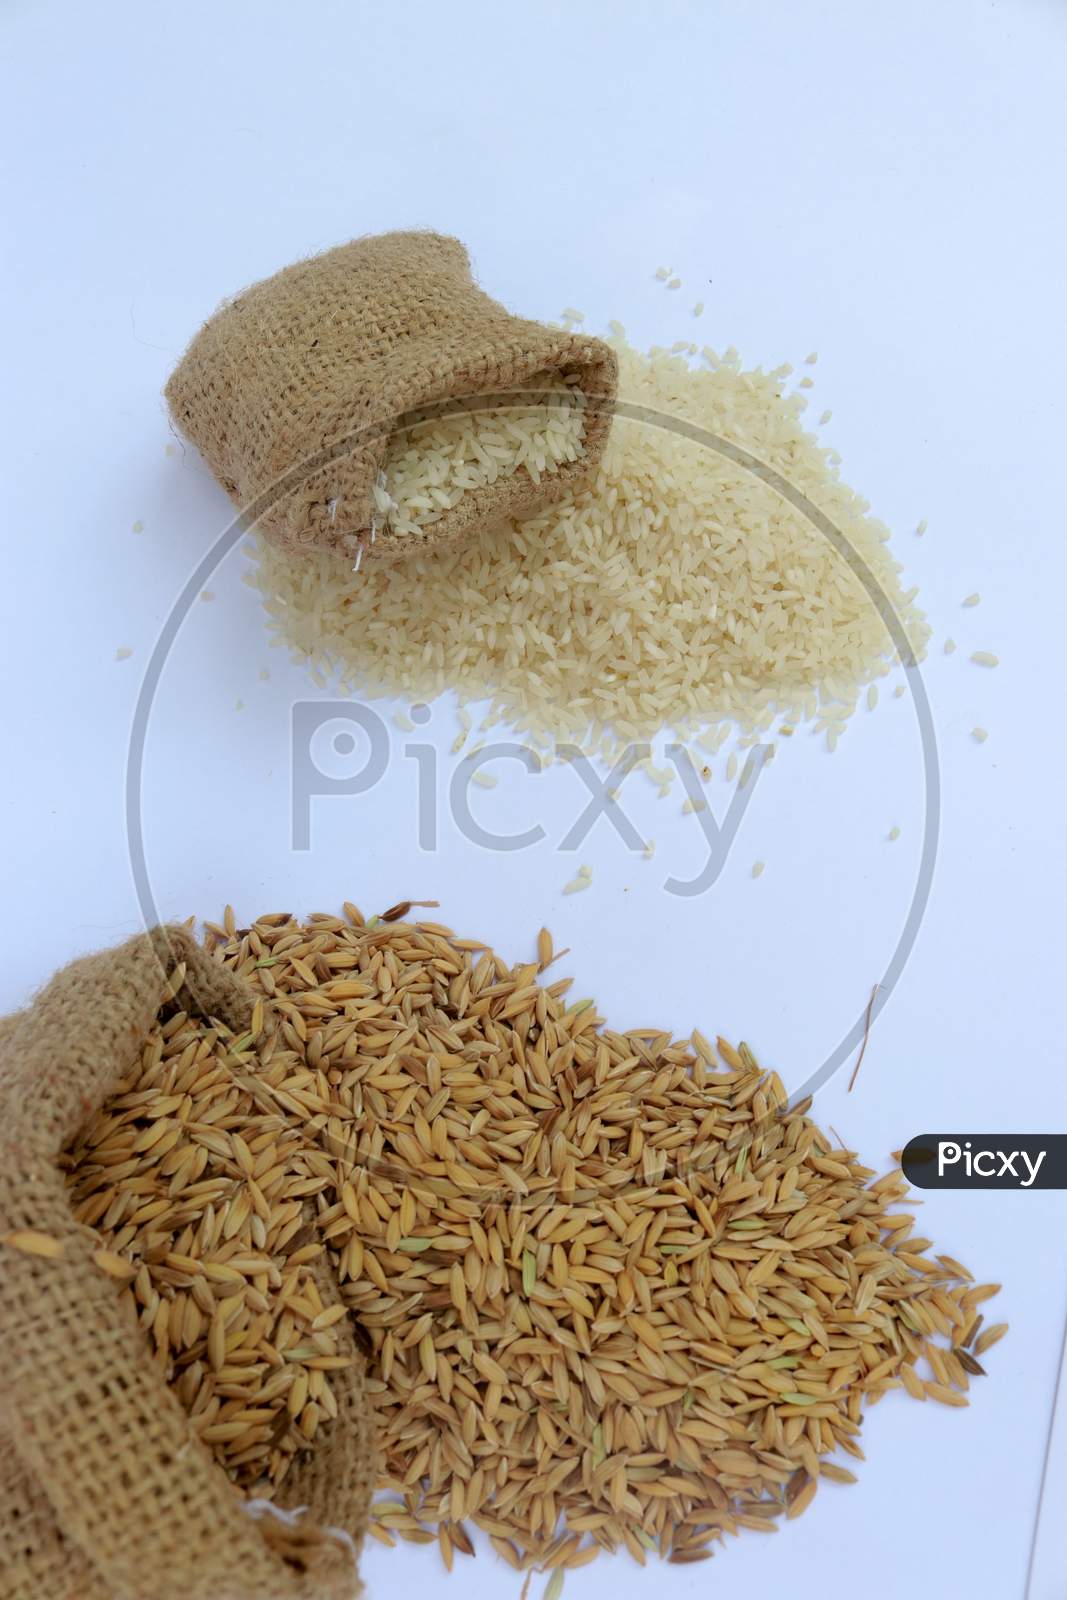 Rice In The Burlap Bag. Healthy Eating And Lifestyle On A White Background